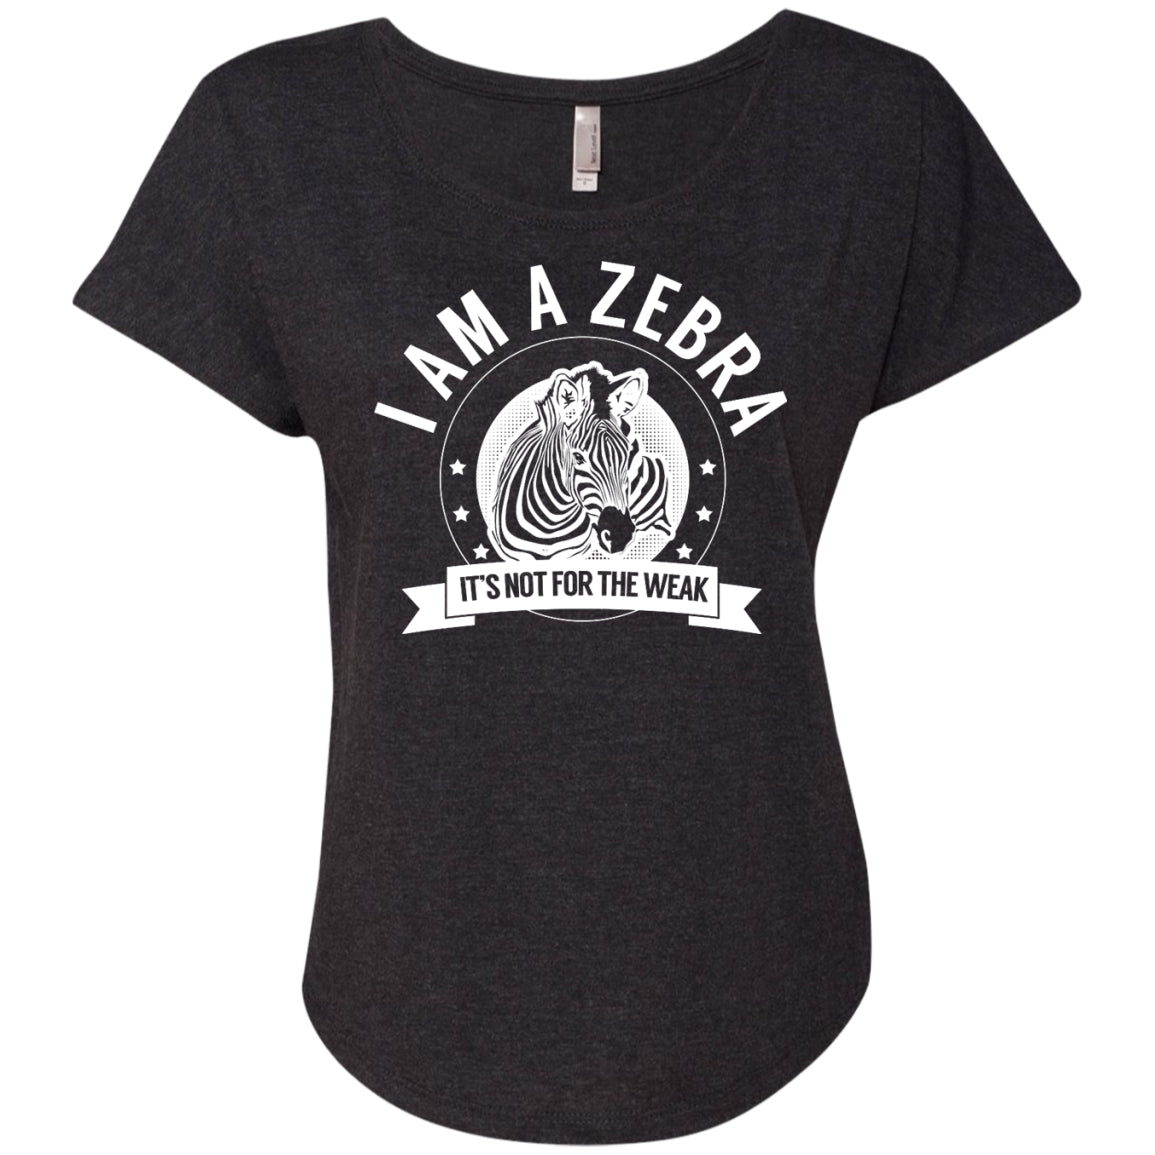 Zebra Warrior Not for the Weak Dolman Sleeve - The Unchargeables